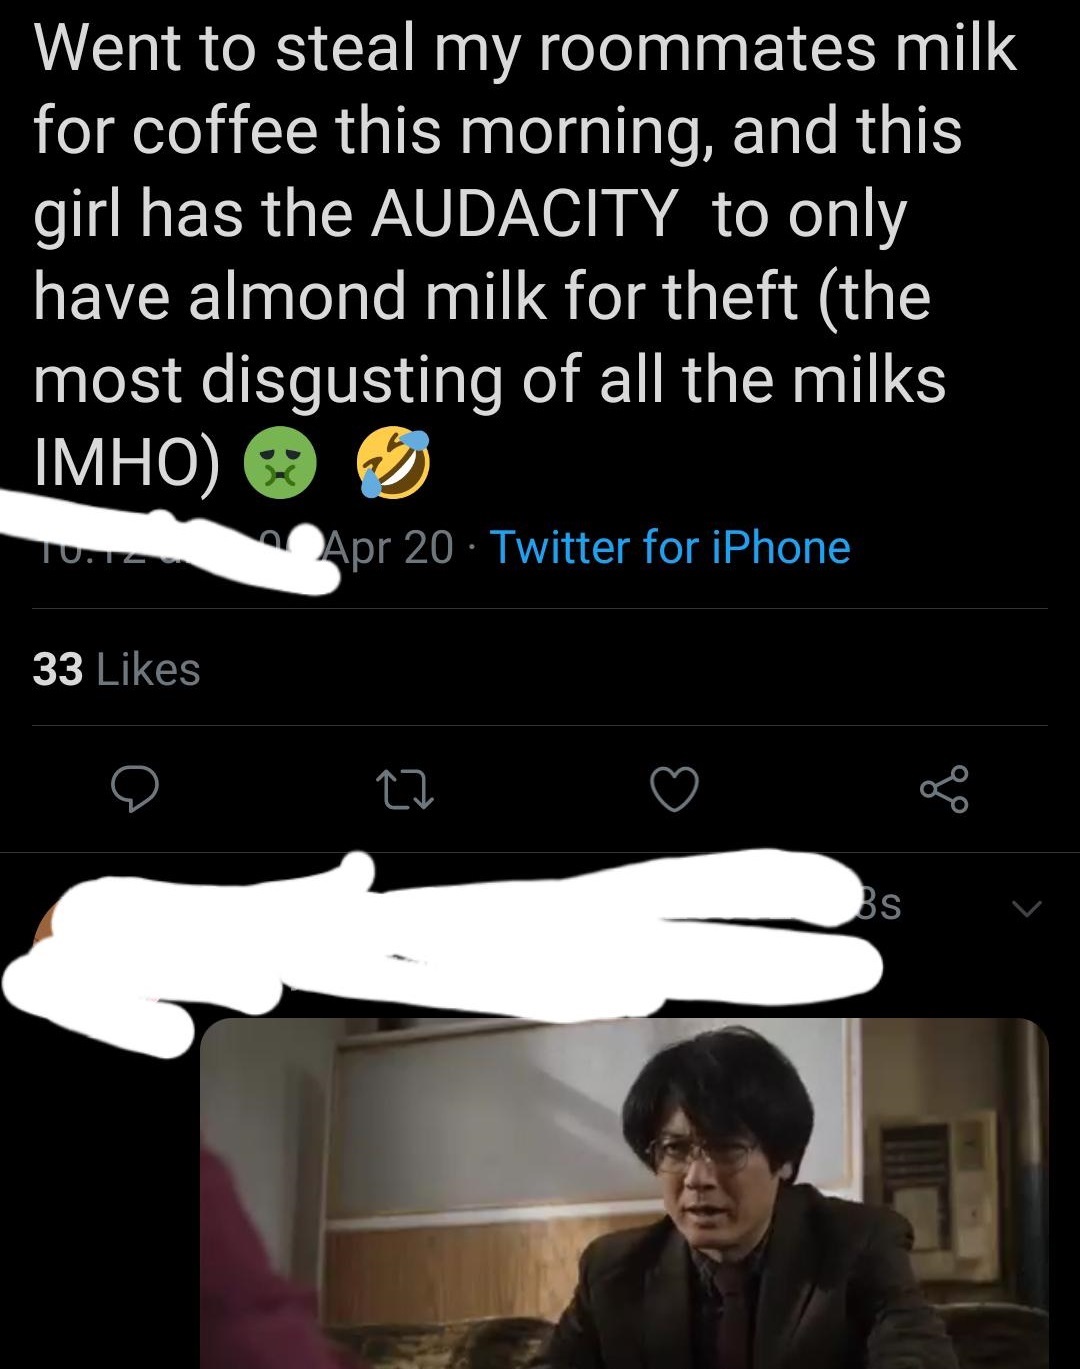 photo caption - Went to steal my roommates milk for coffee this morning, and this girl has the Audacity to only have almond milk for theft the most disgusting of all the milks Imho Tum A pr 20 Twitter for iPhone 33 o ao s Bs